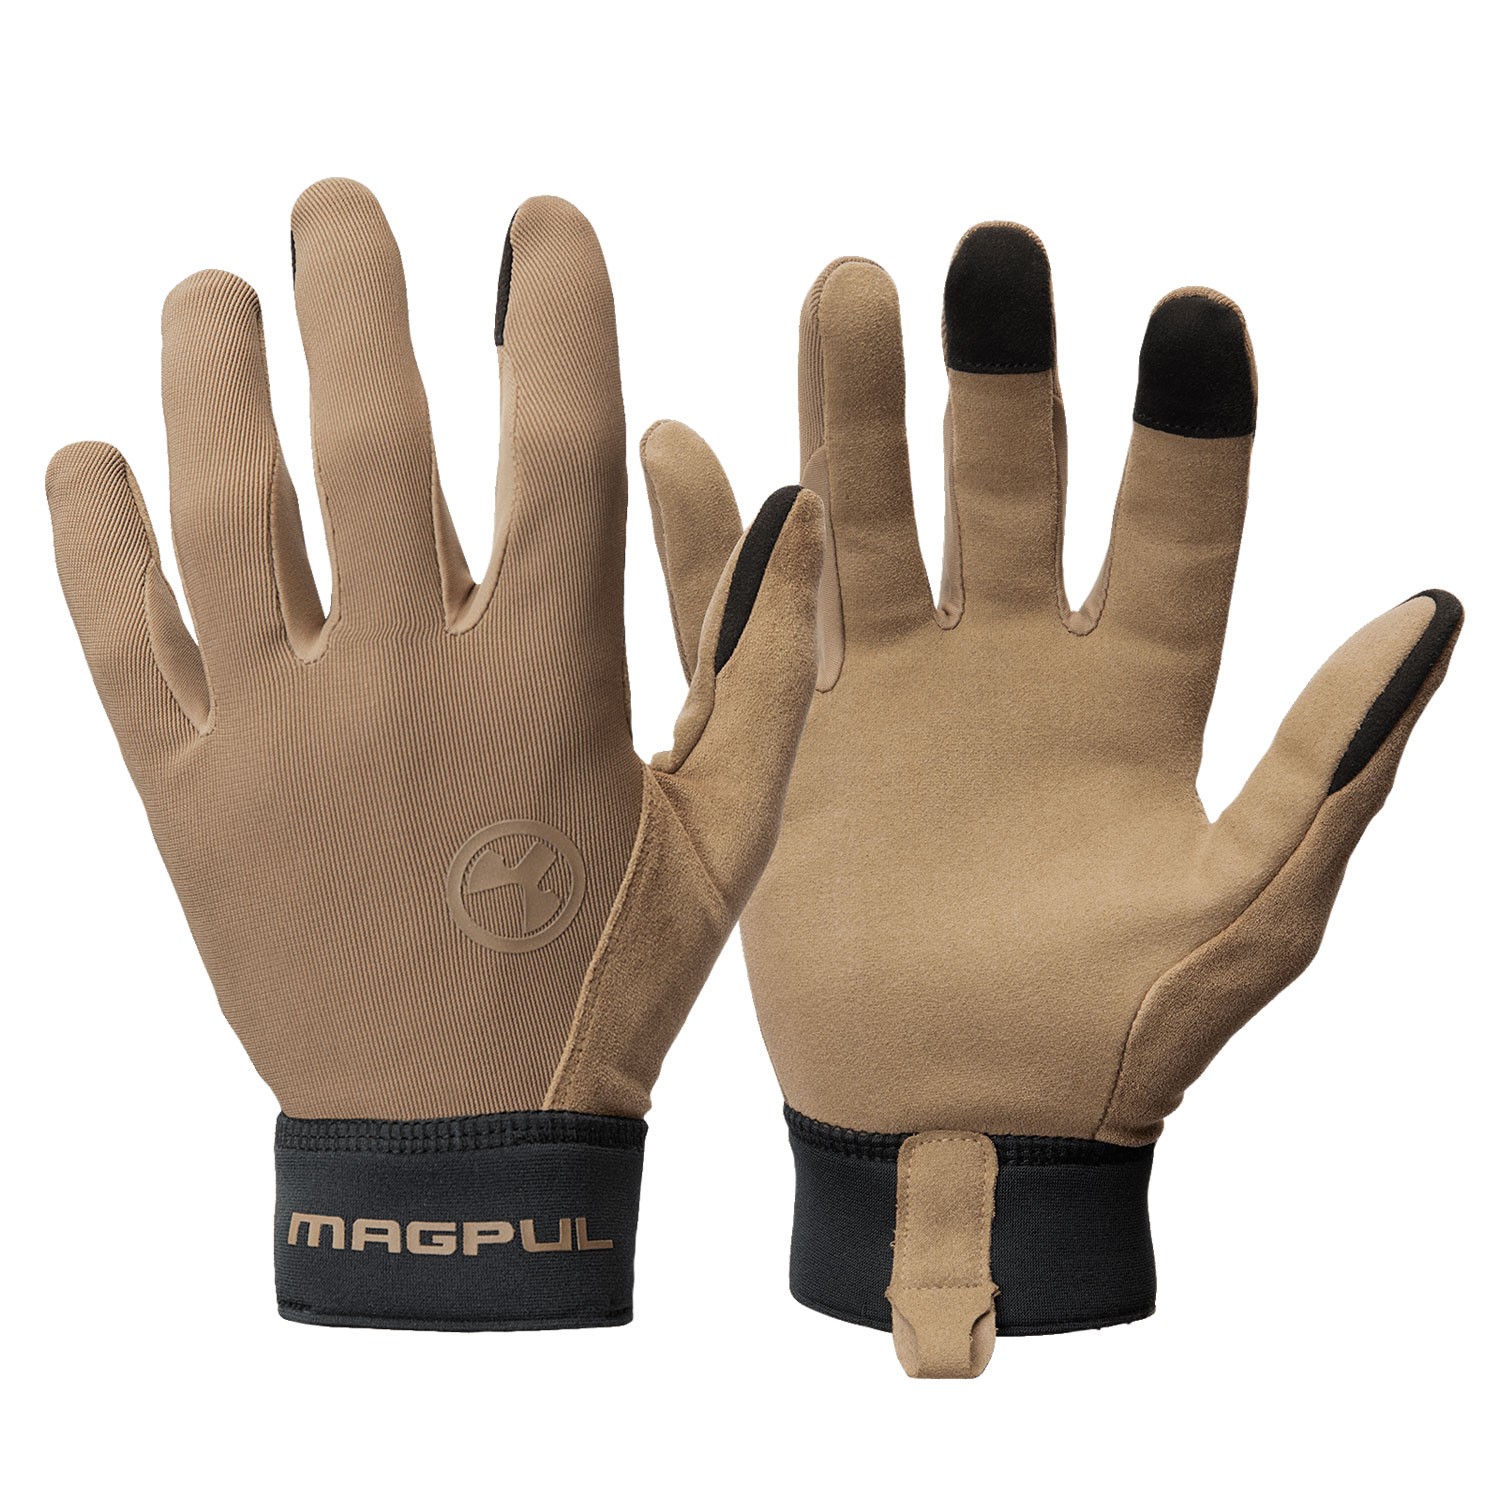 MAGPUL TECHNICAL GLOVES, LG, COYOTE, HAS TOUCHSCREEN CAPABLE FINGER TIPS.